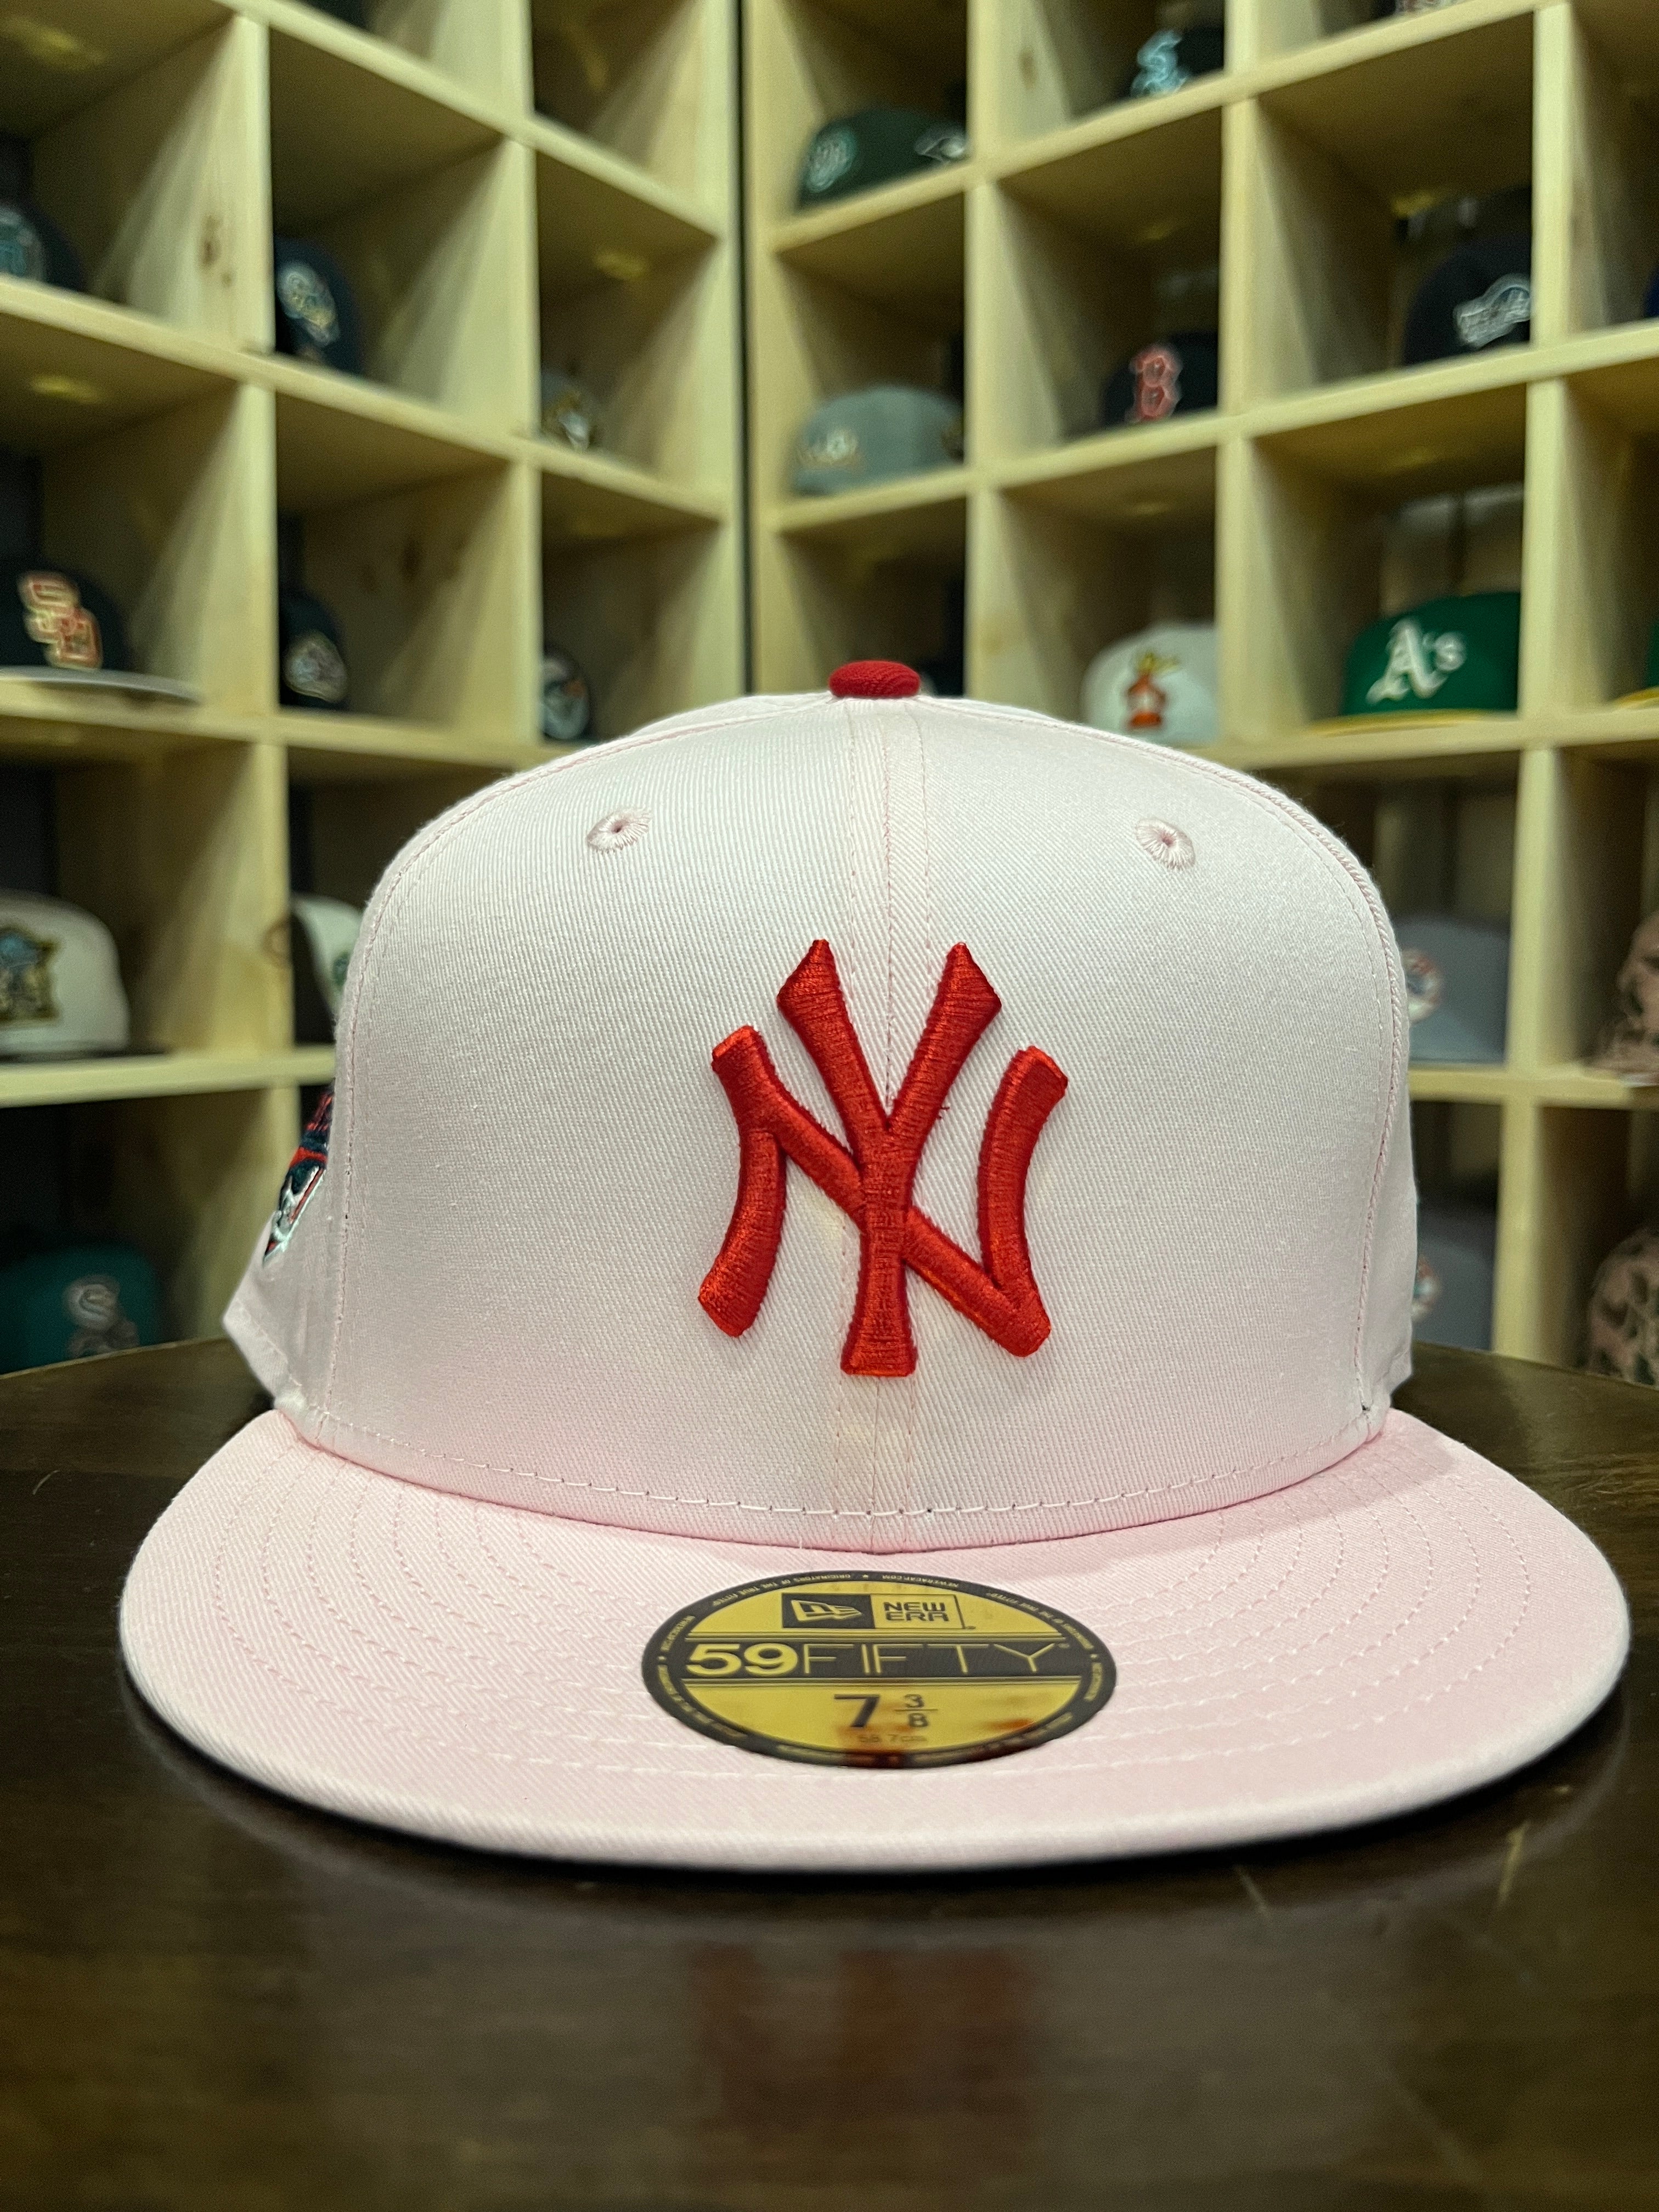 Cherry New York Yankees 1996 World Series New Era 59Fifty Fitted Hat